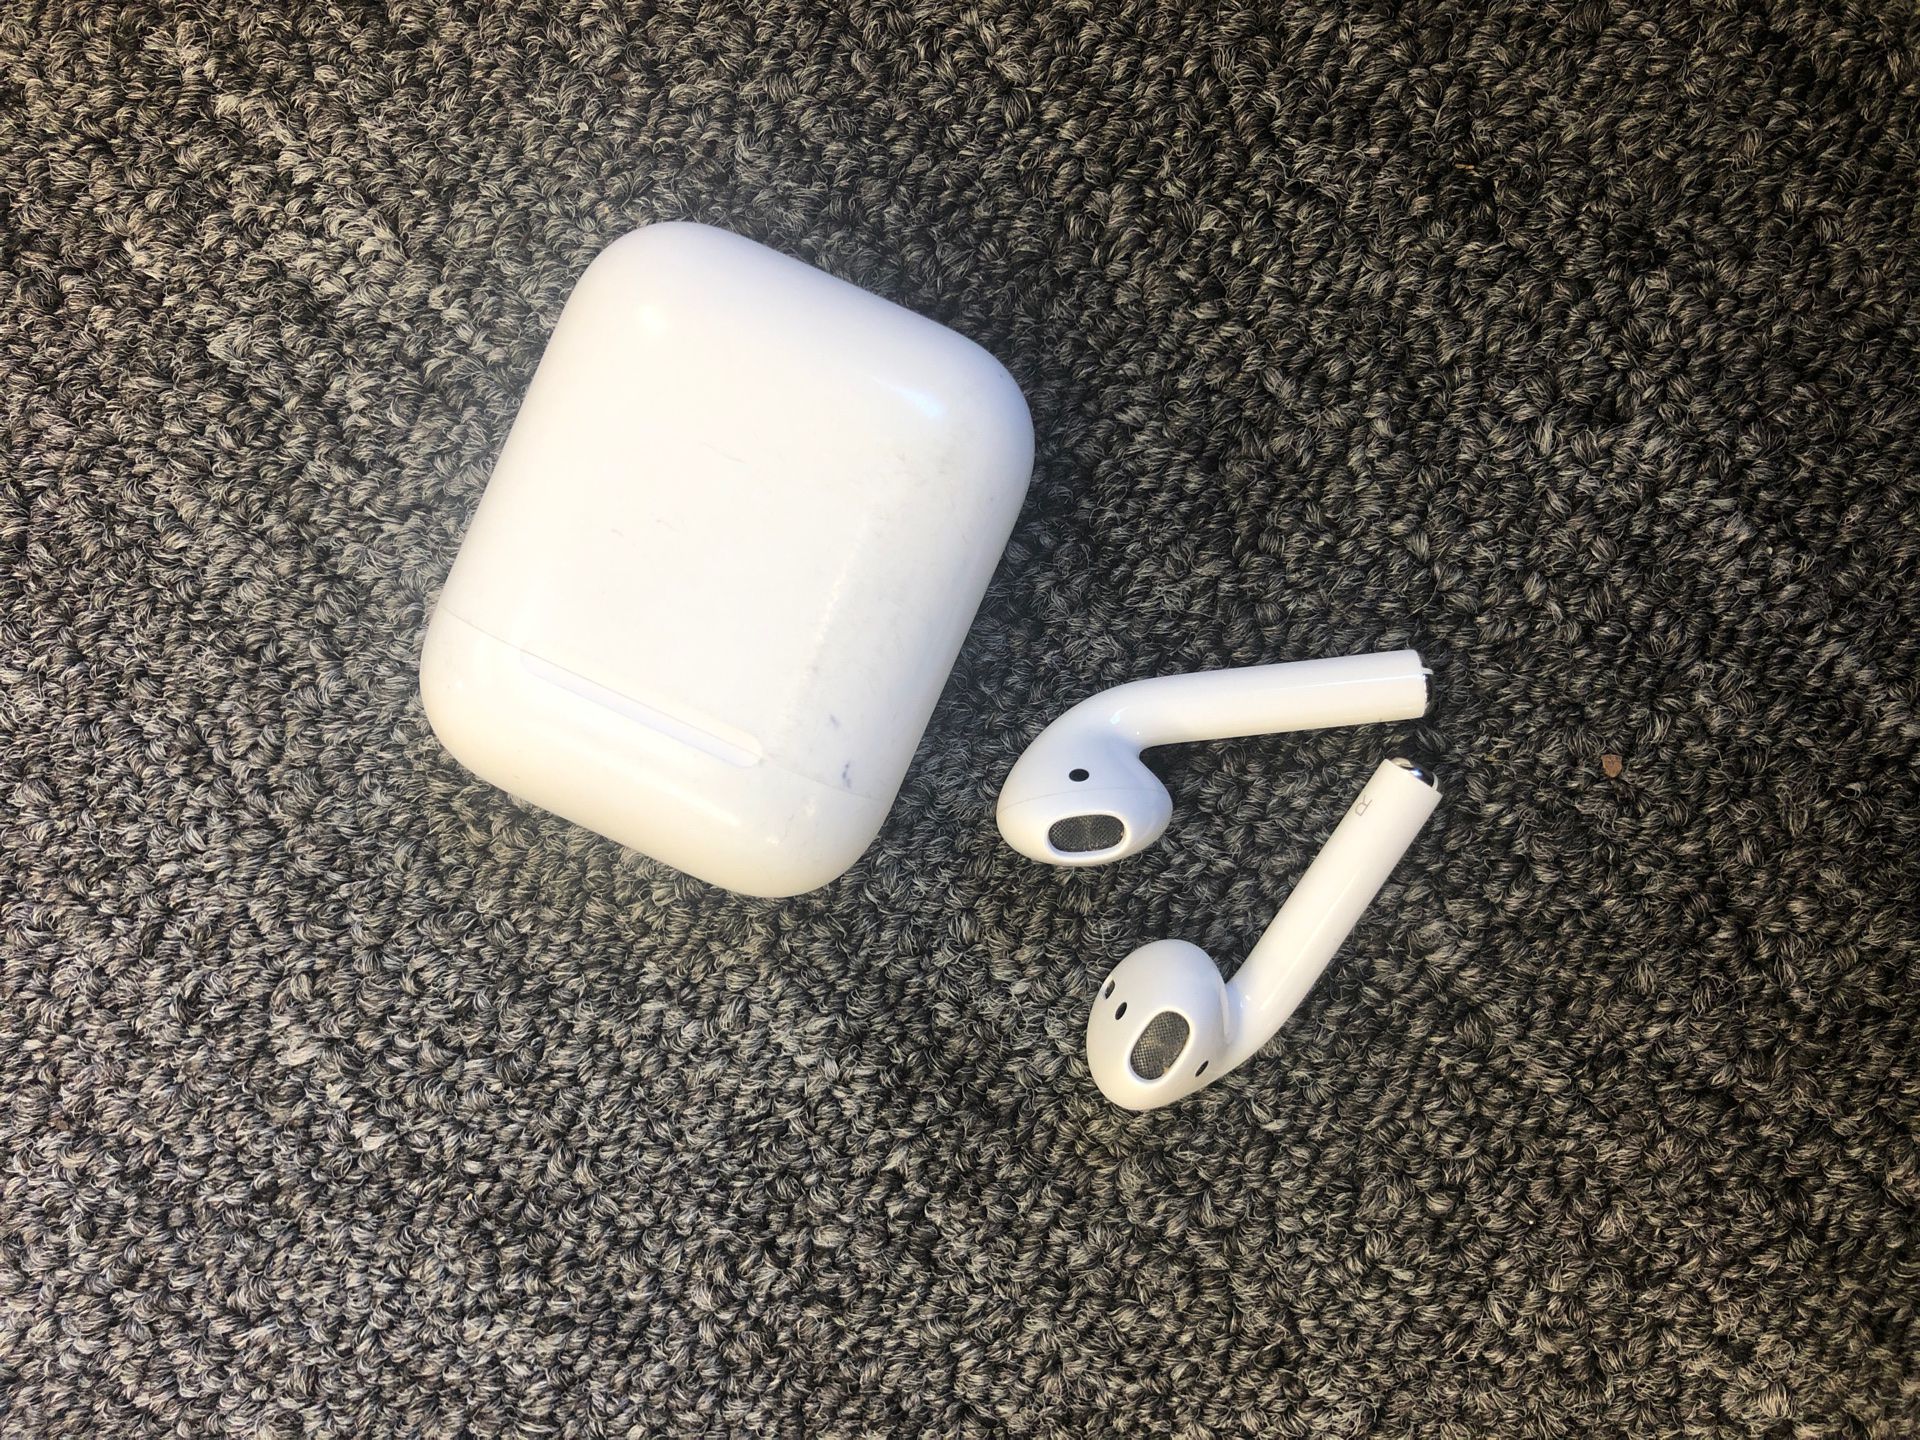 Used First Gen Apple AirPods